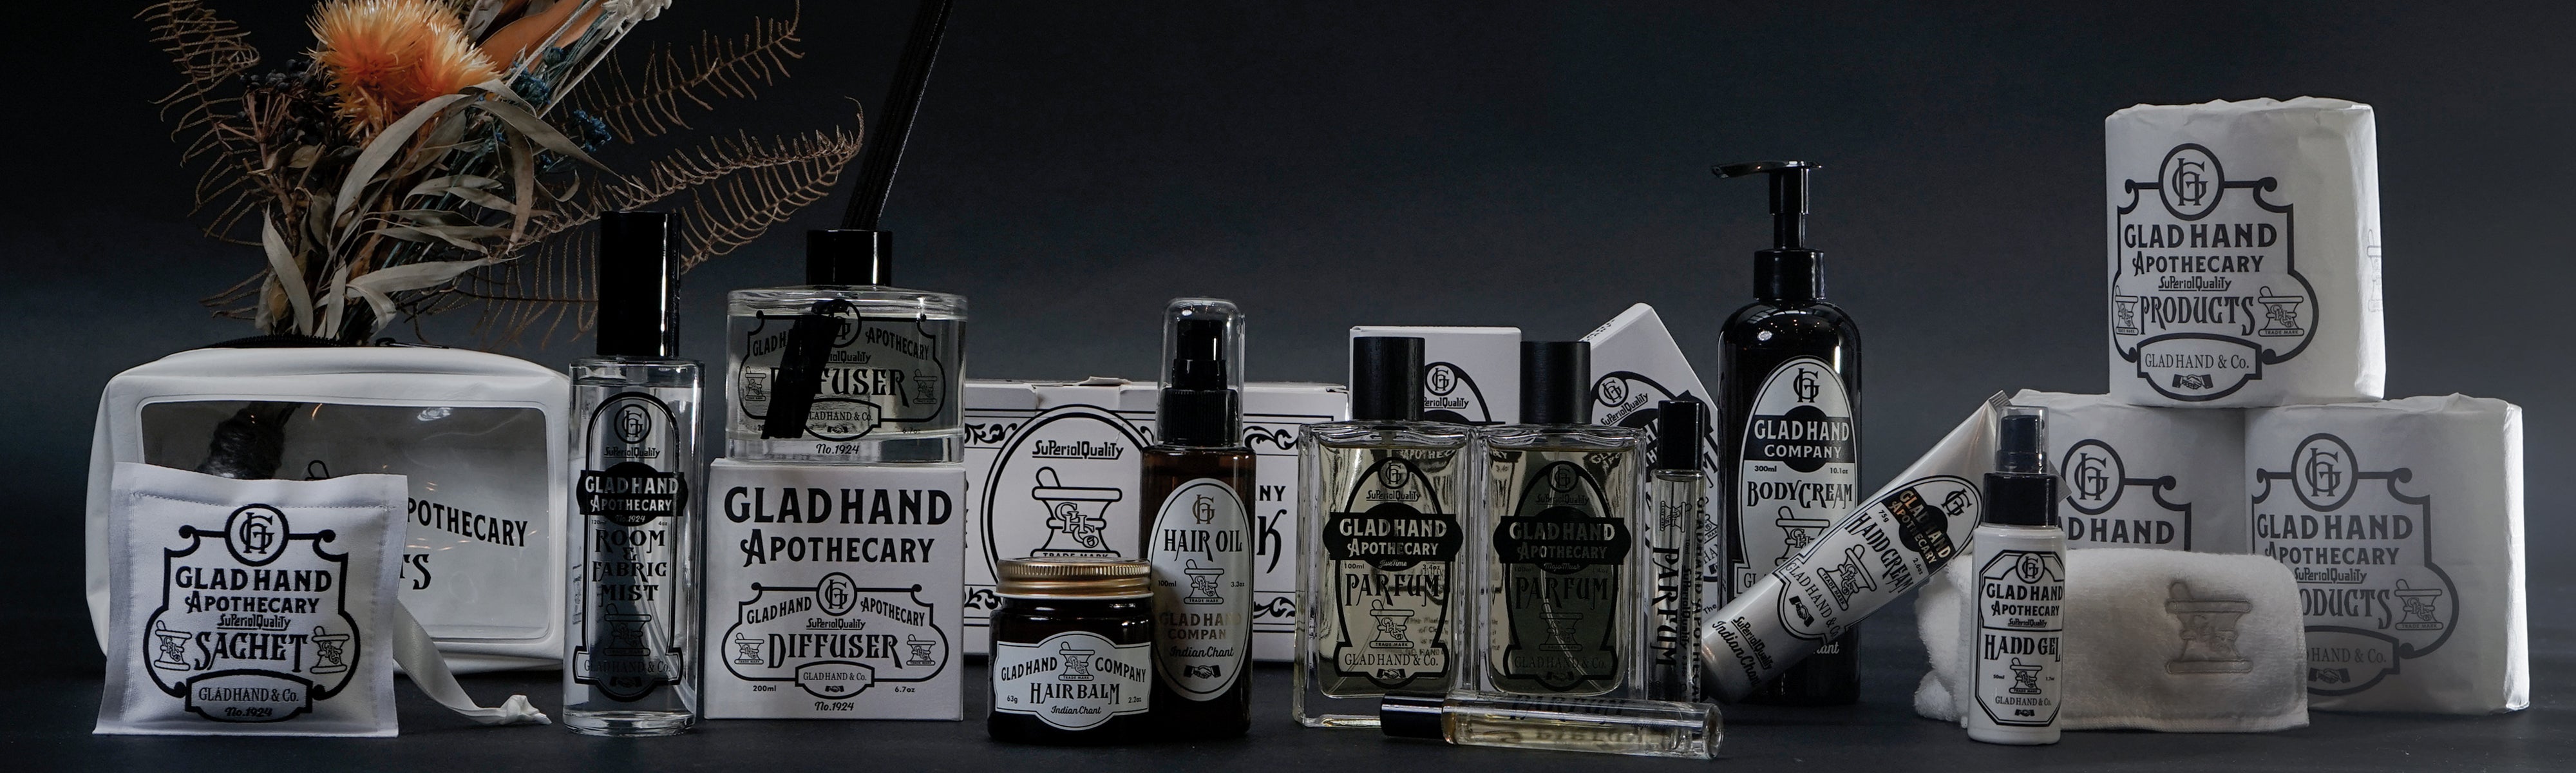 APOTHECARY – GLADHAND & Co.